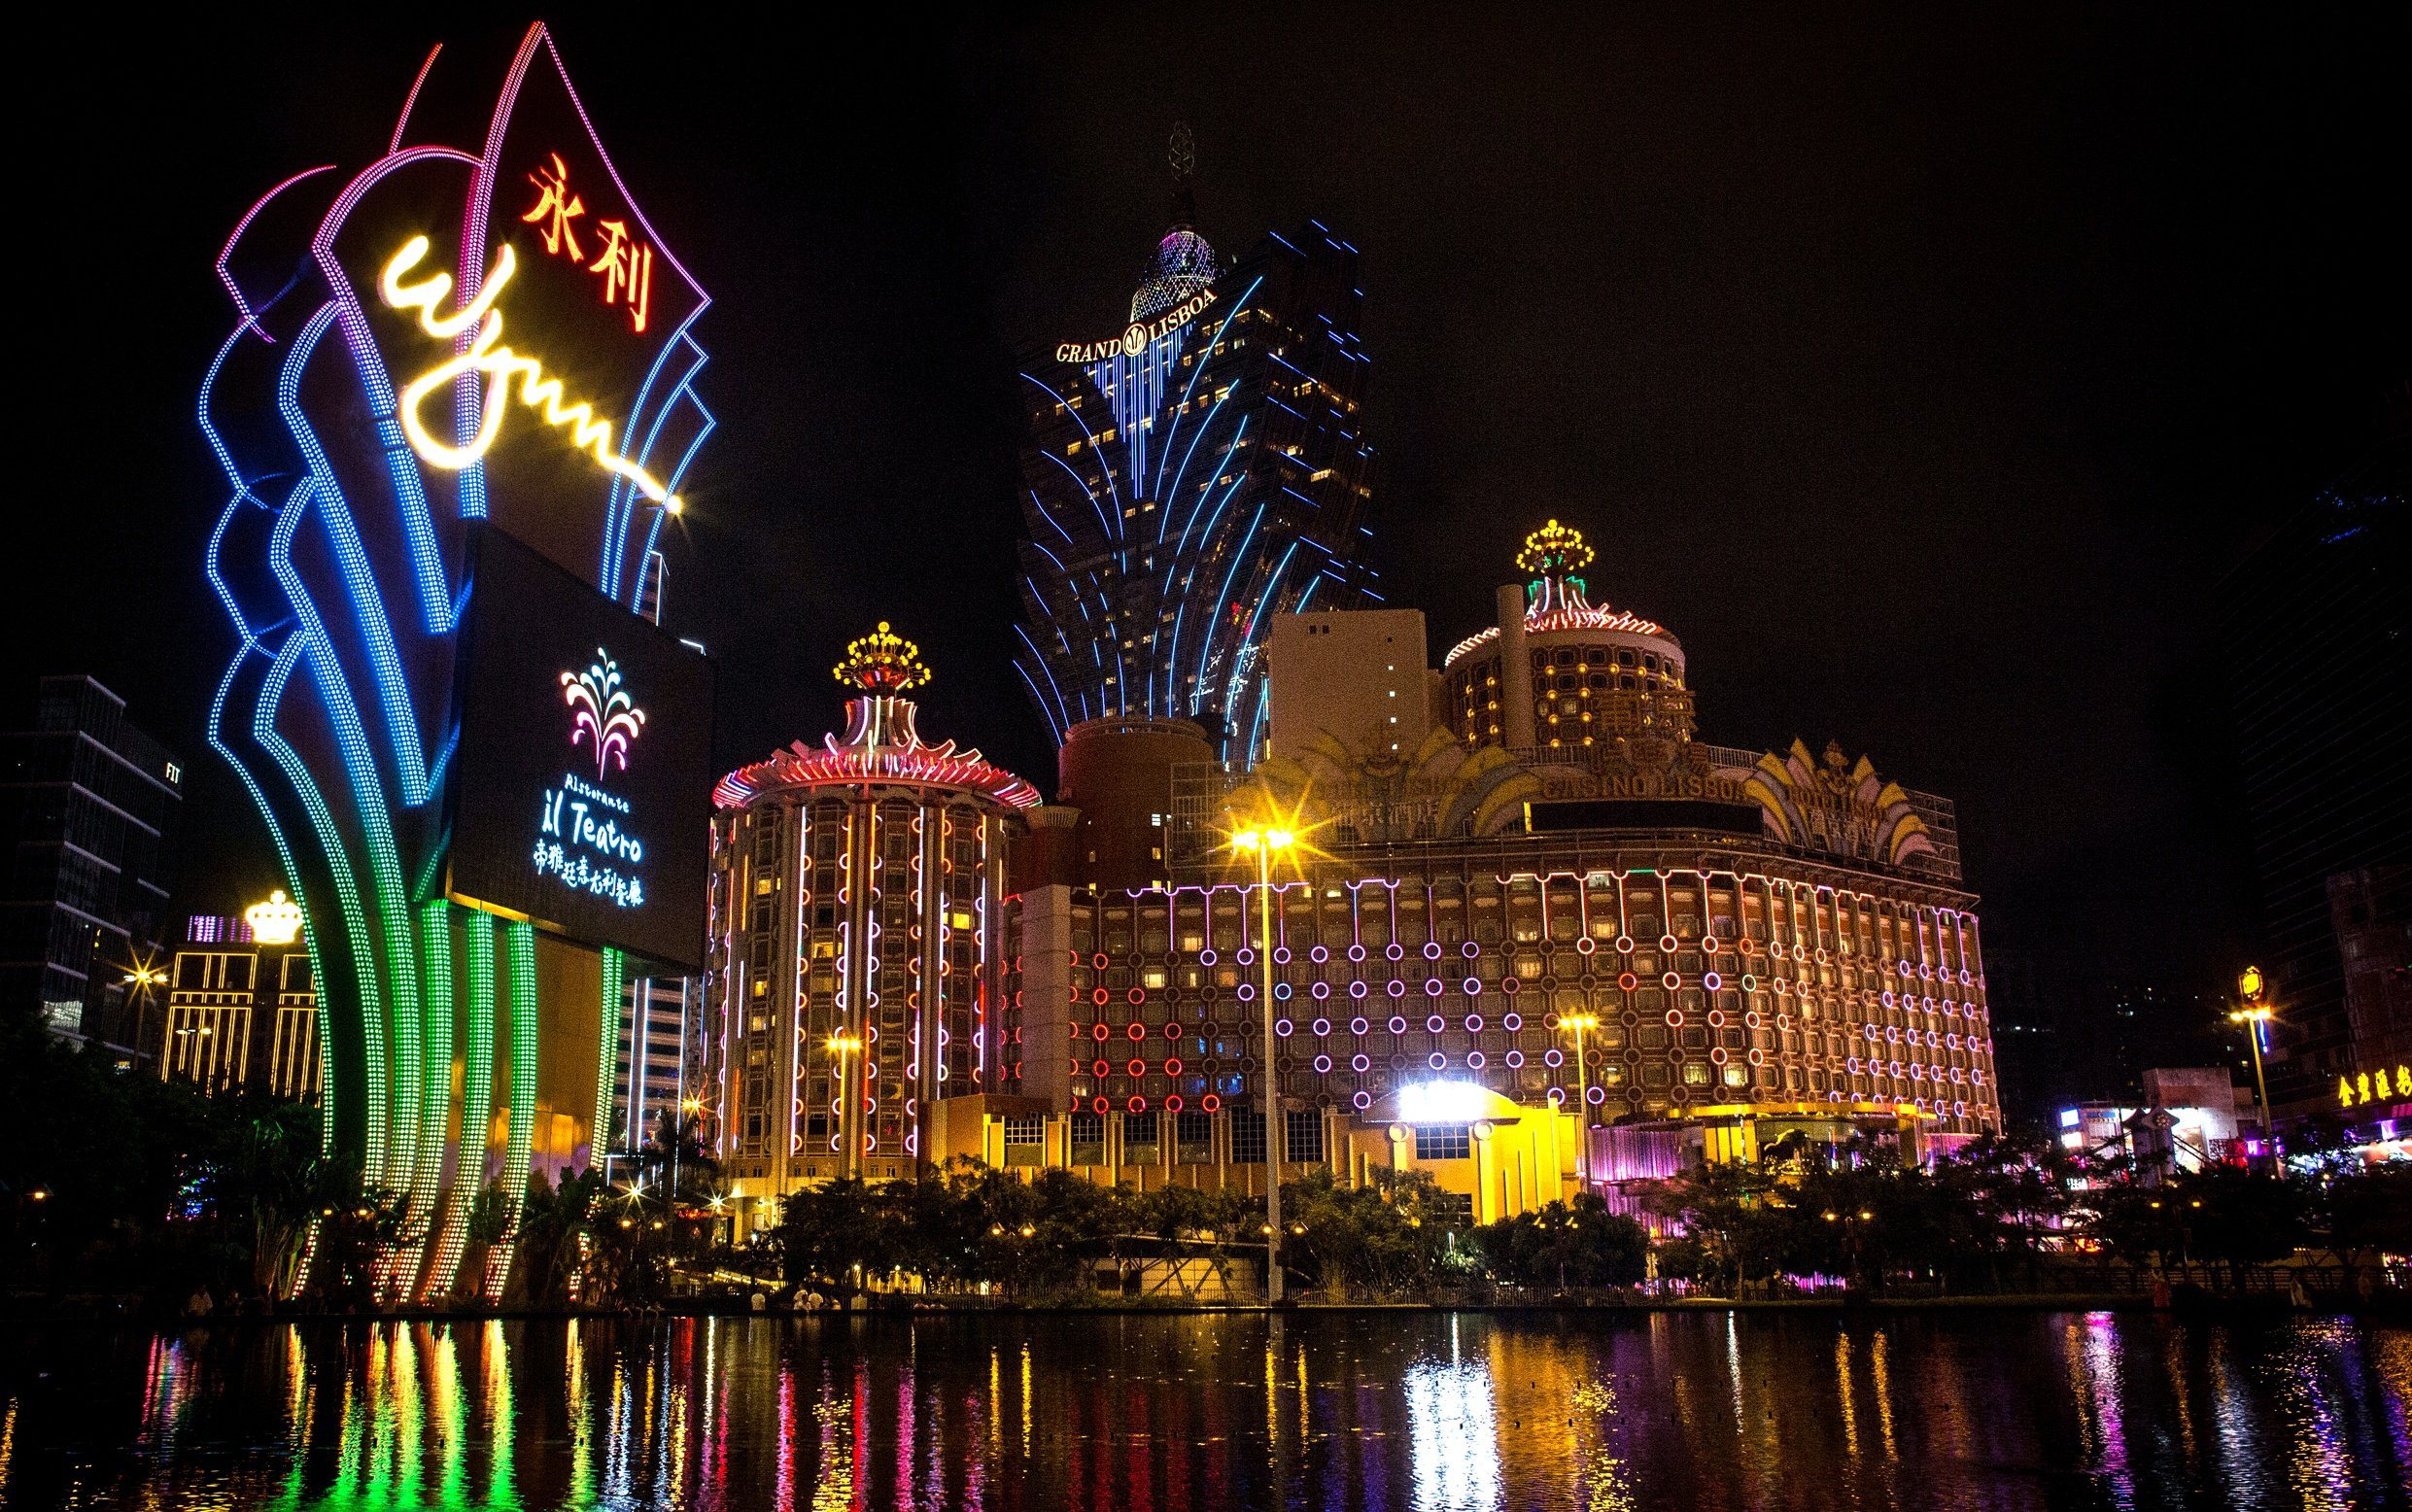 Macau casinos get loans from their US counterparts amid yet another shutdown.